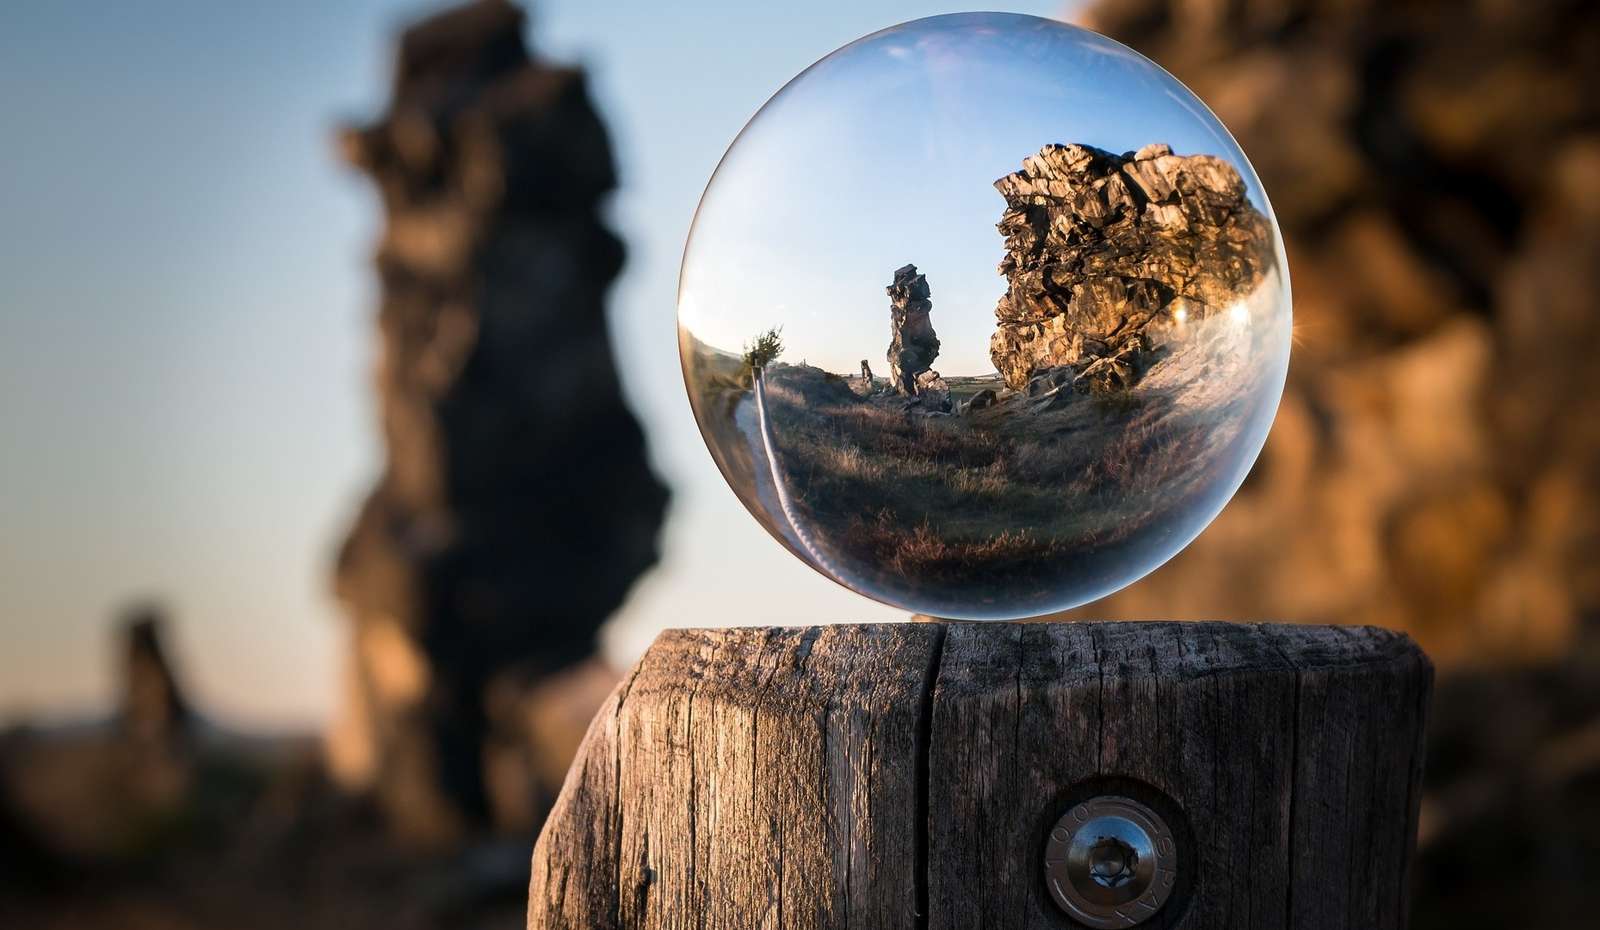 Reflection of rocks in a glass ball jigsaw puzzle online